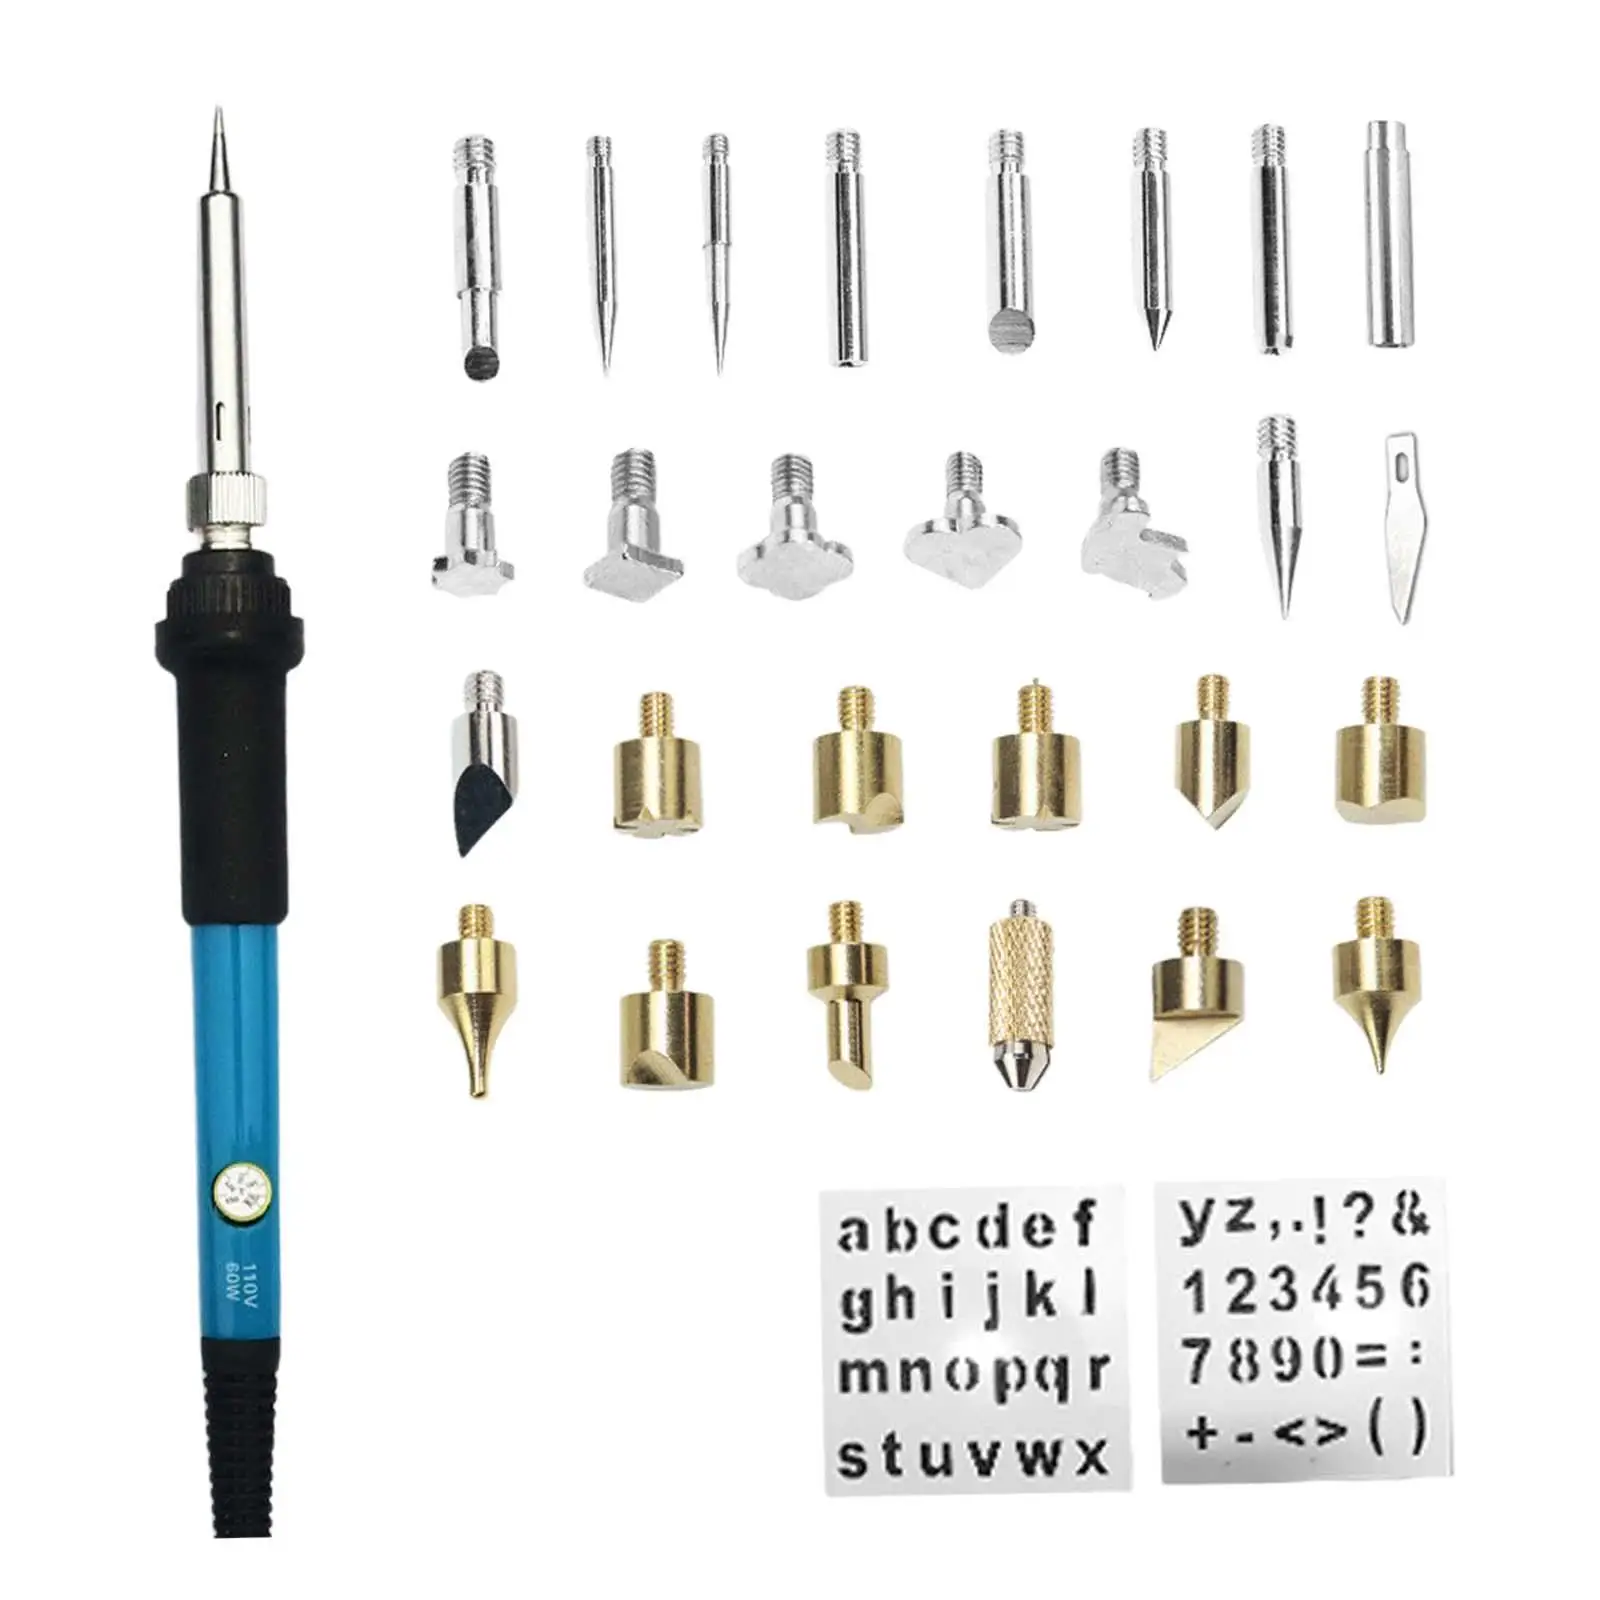 30 Pieces Solder Iron Tool 60W Wood Painting Electric Welding Tool Professional DIY Digital Display Portable Soldering Iron Set